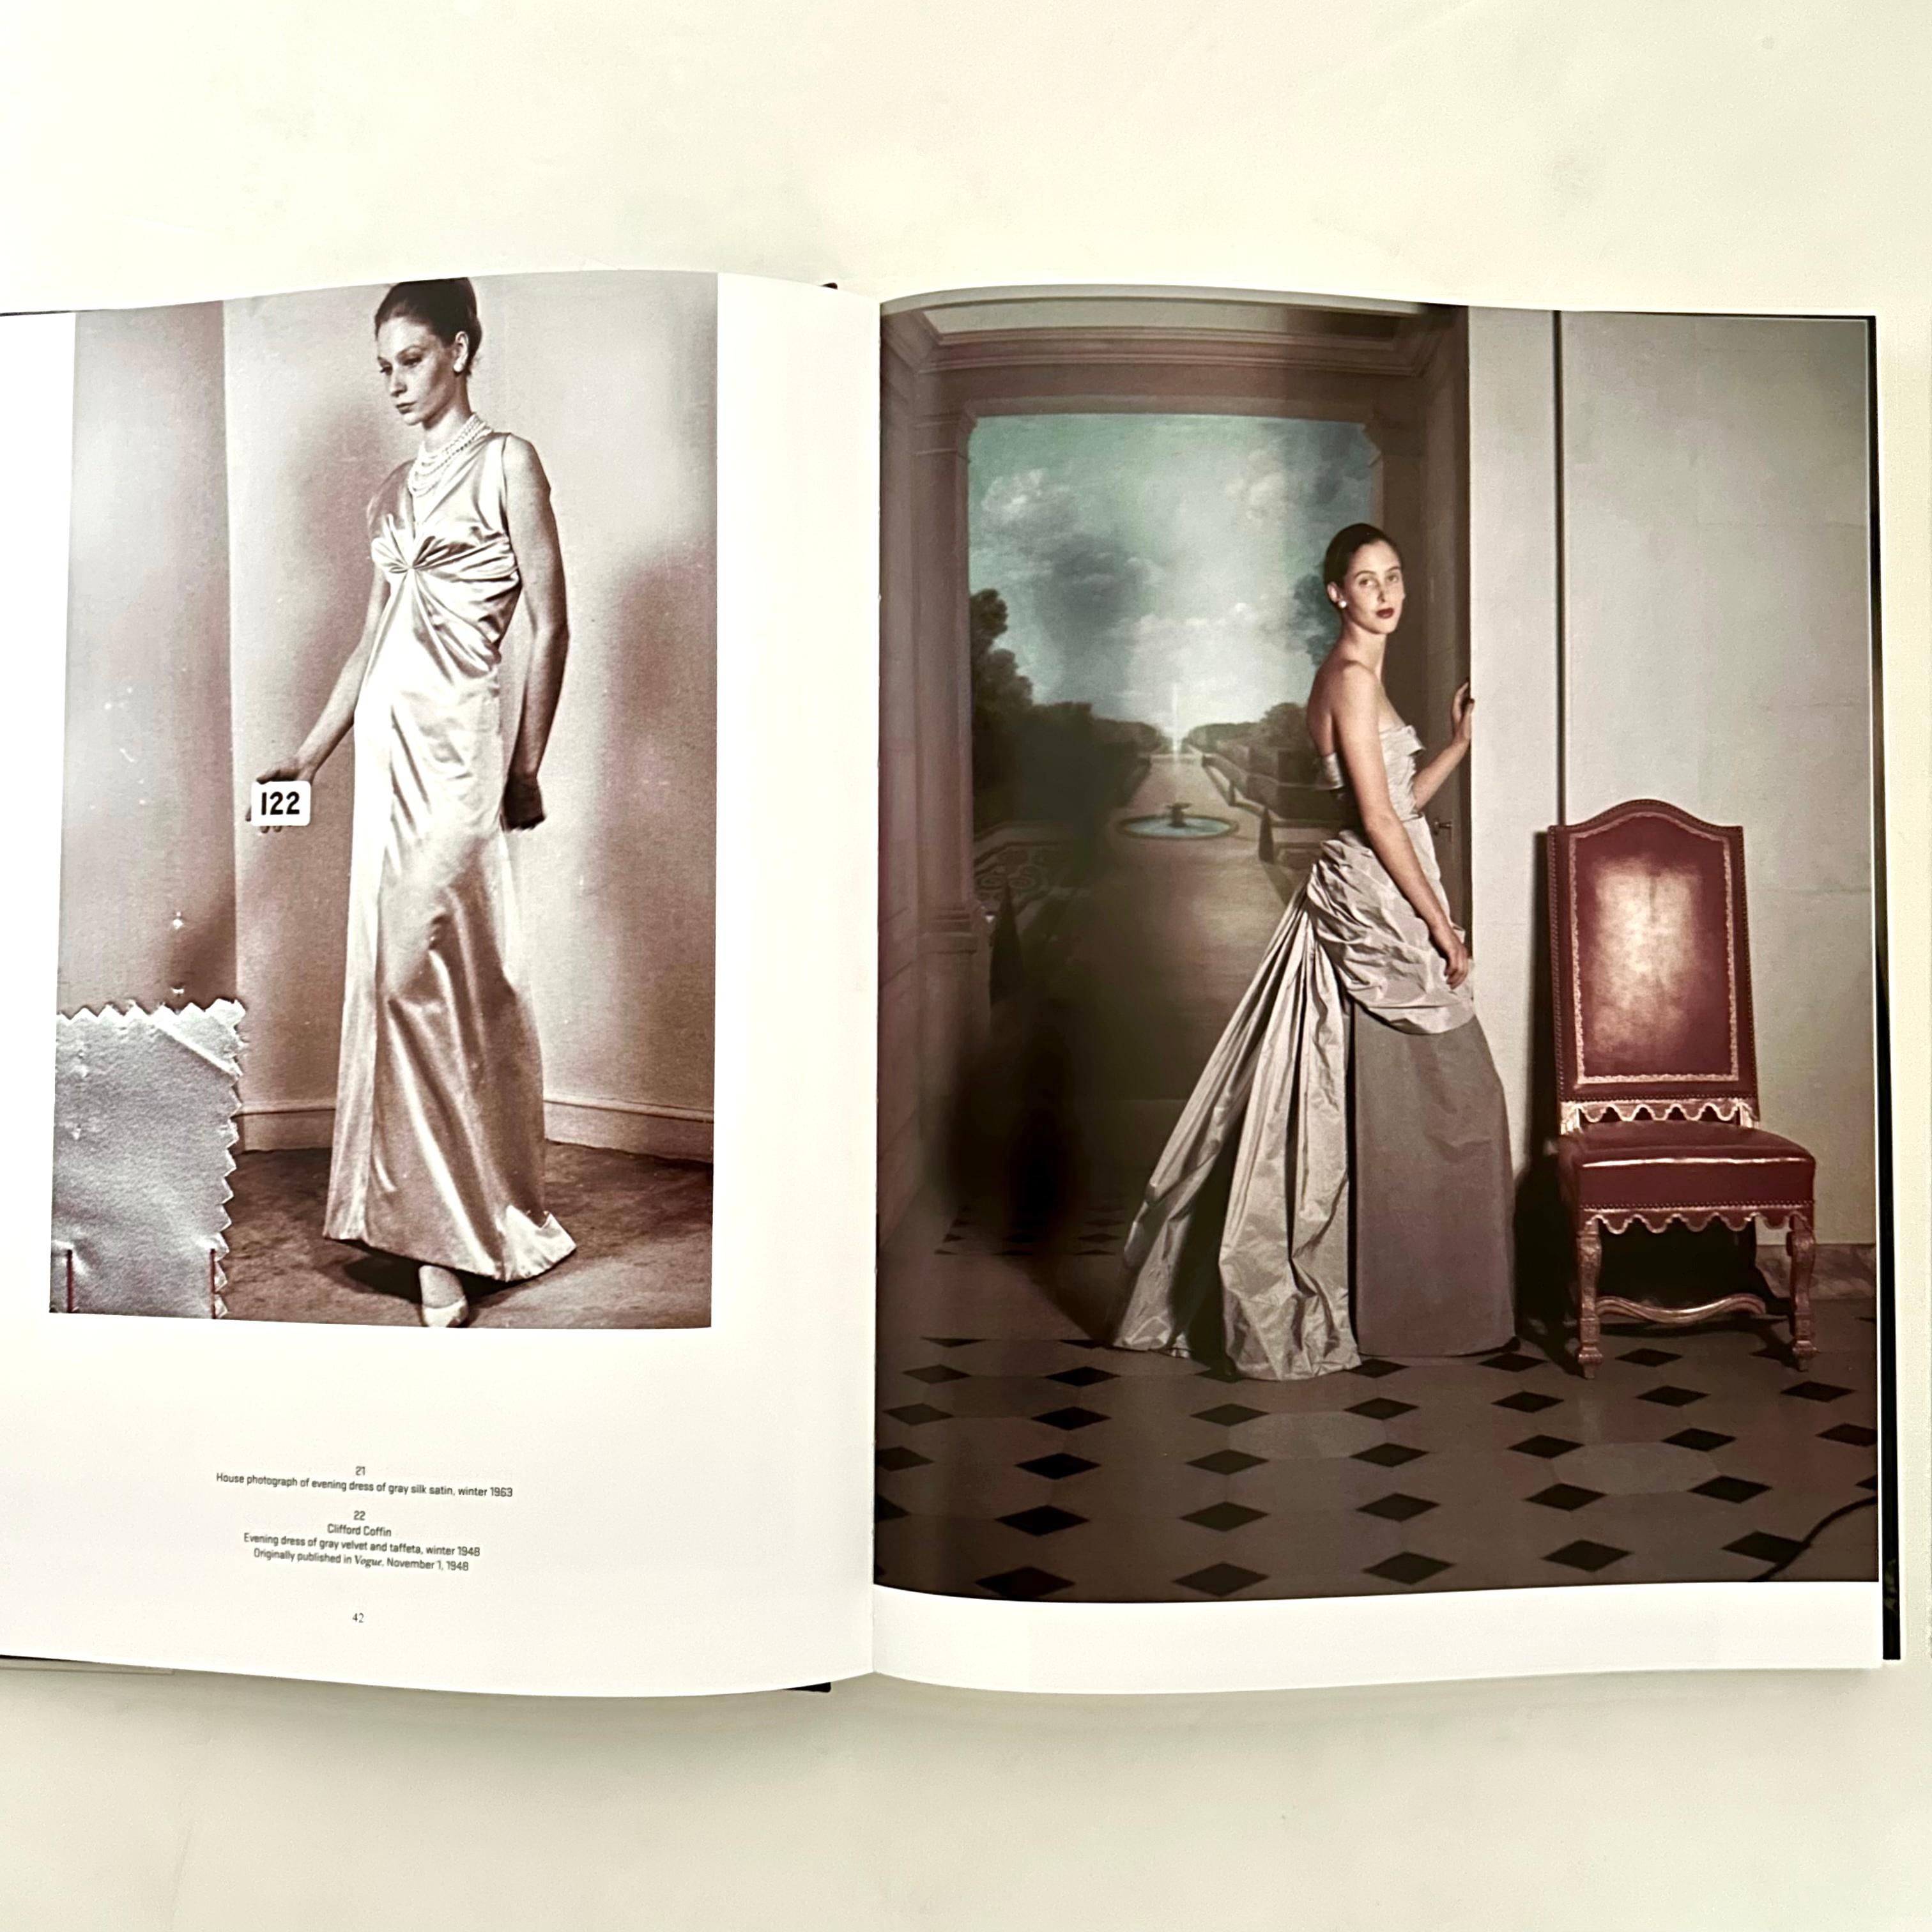 Paper Balenciaga and Spain - Hamish Bowles - 1st Edition, New York, 2011 For Sale